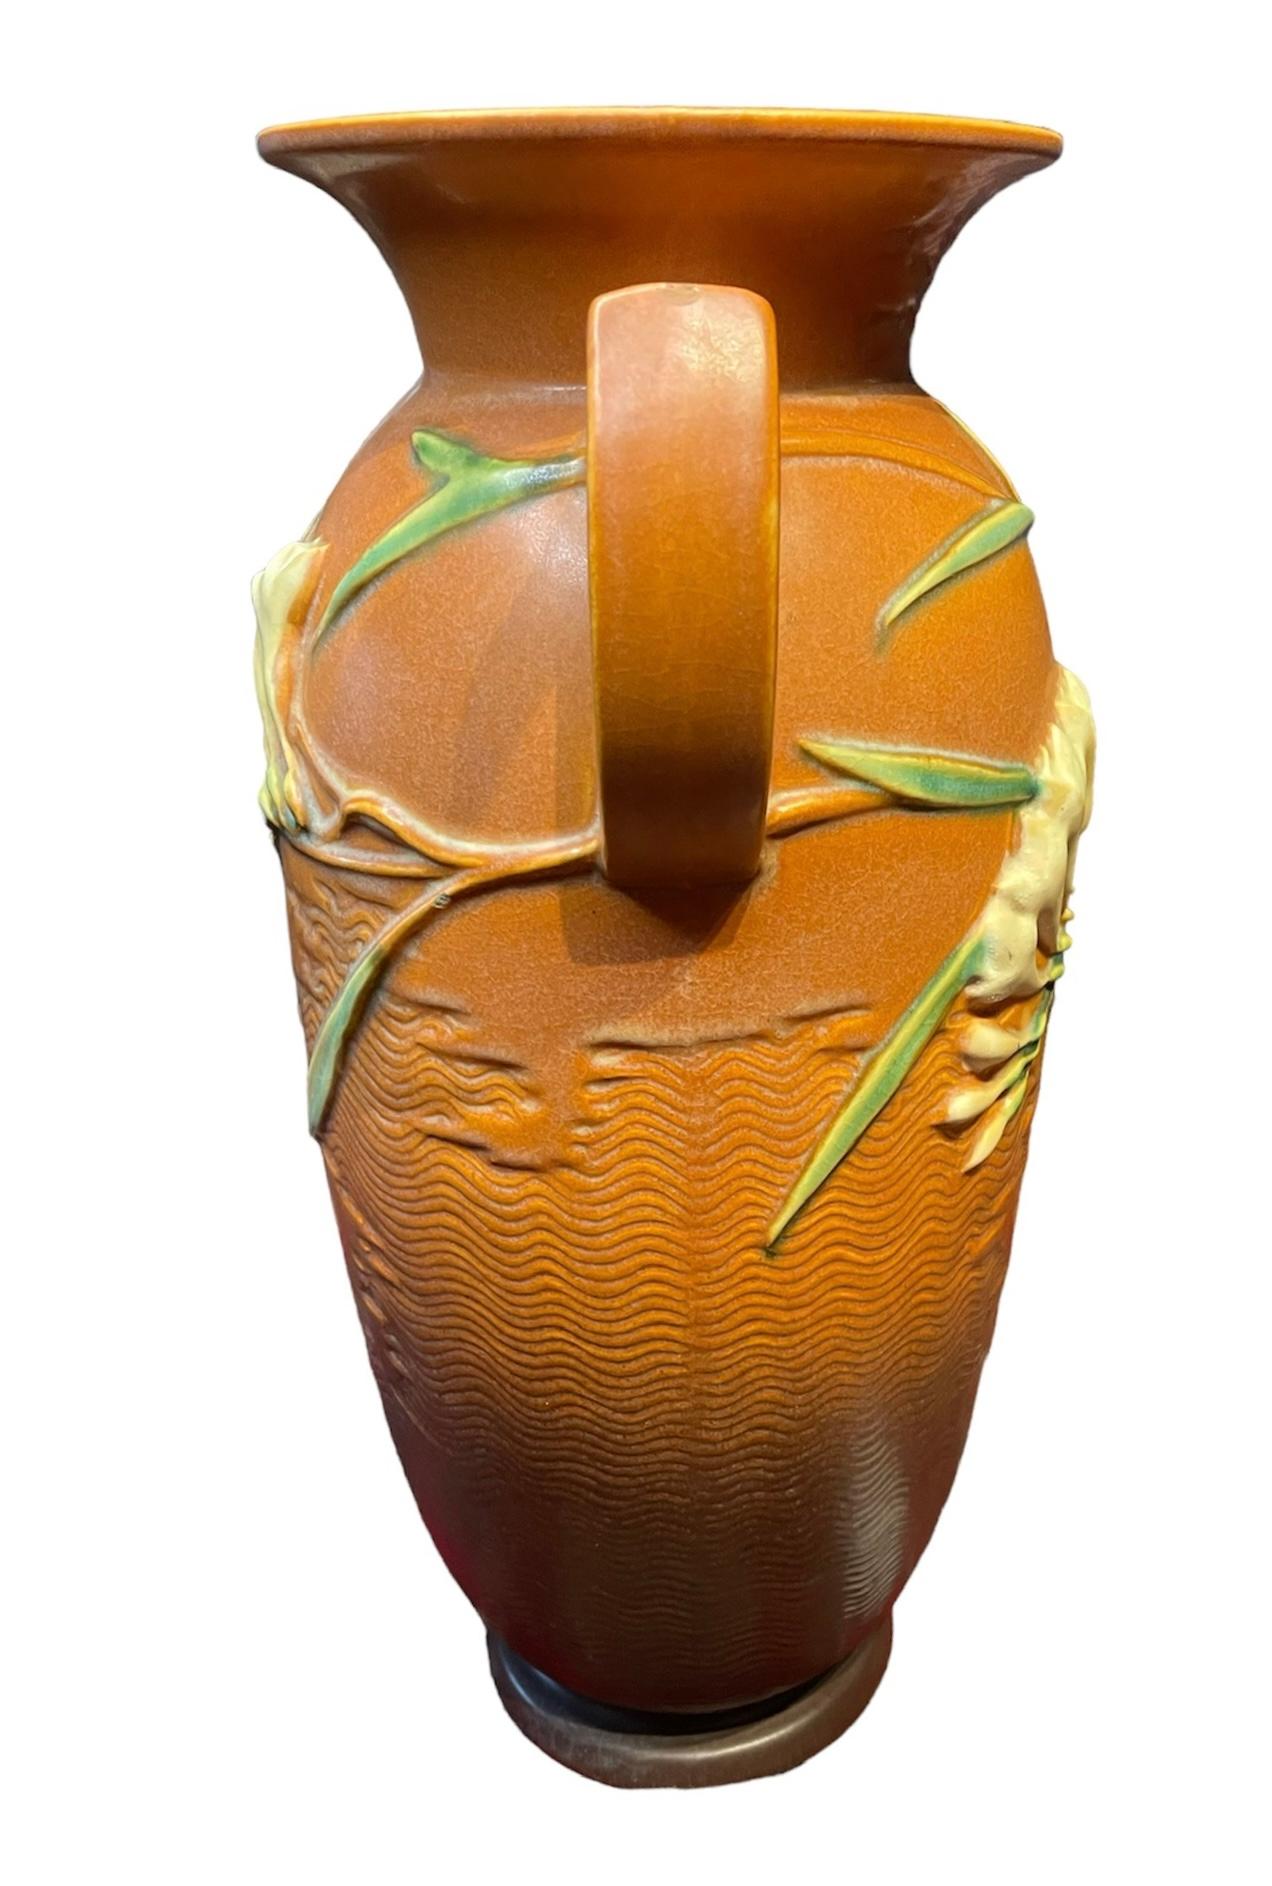 This is a brick/clay color jar shaped Roseville vase. It is decorated with a relief of long green leaves & branches of Freesia white and yellow flowers in the back and front. Two D-shaped handles come out from each side of the upper body. Under the